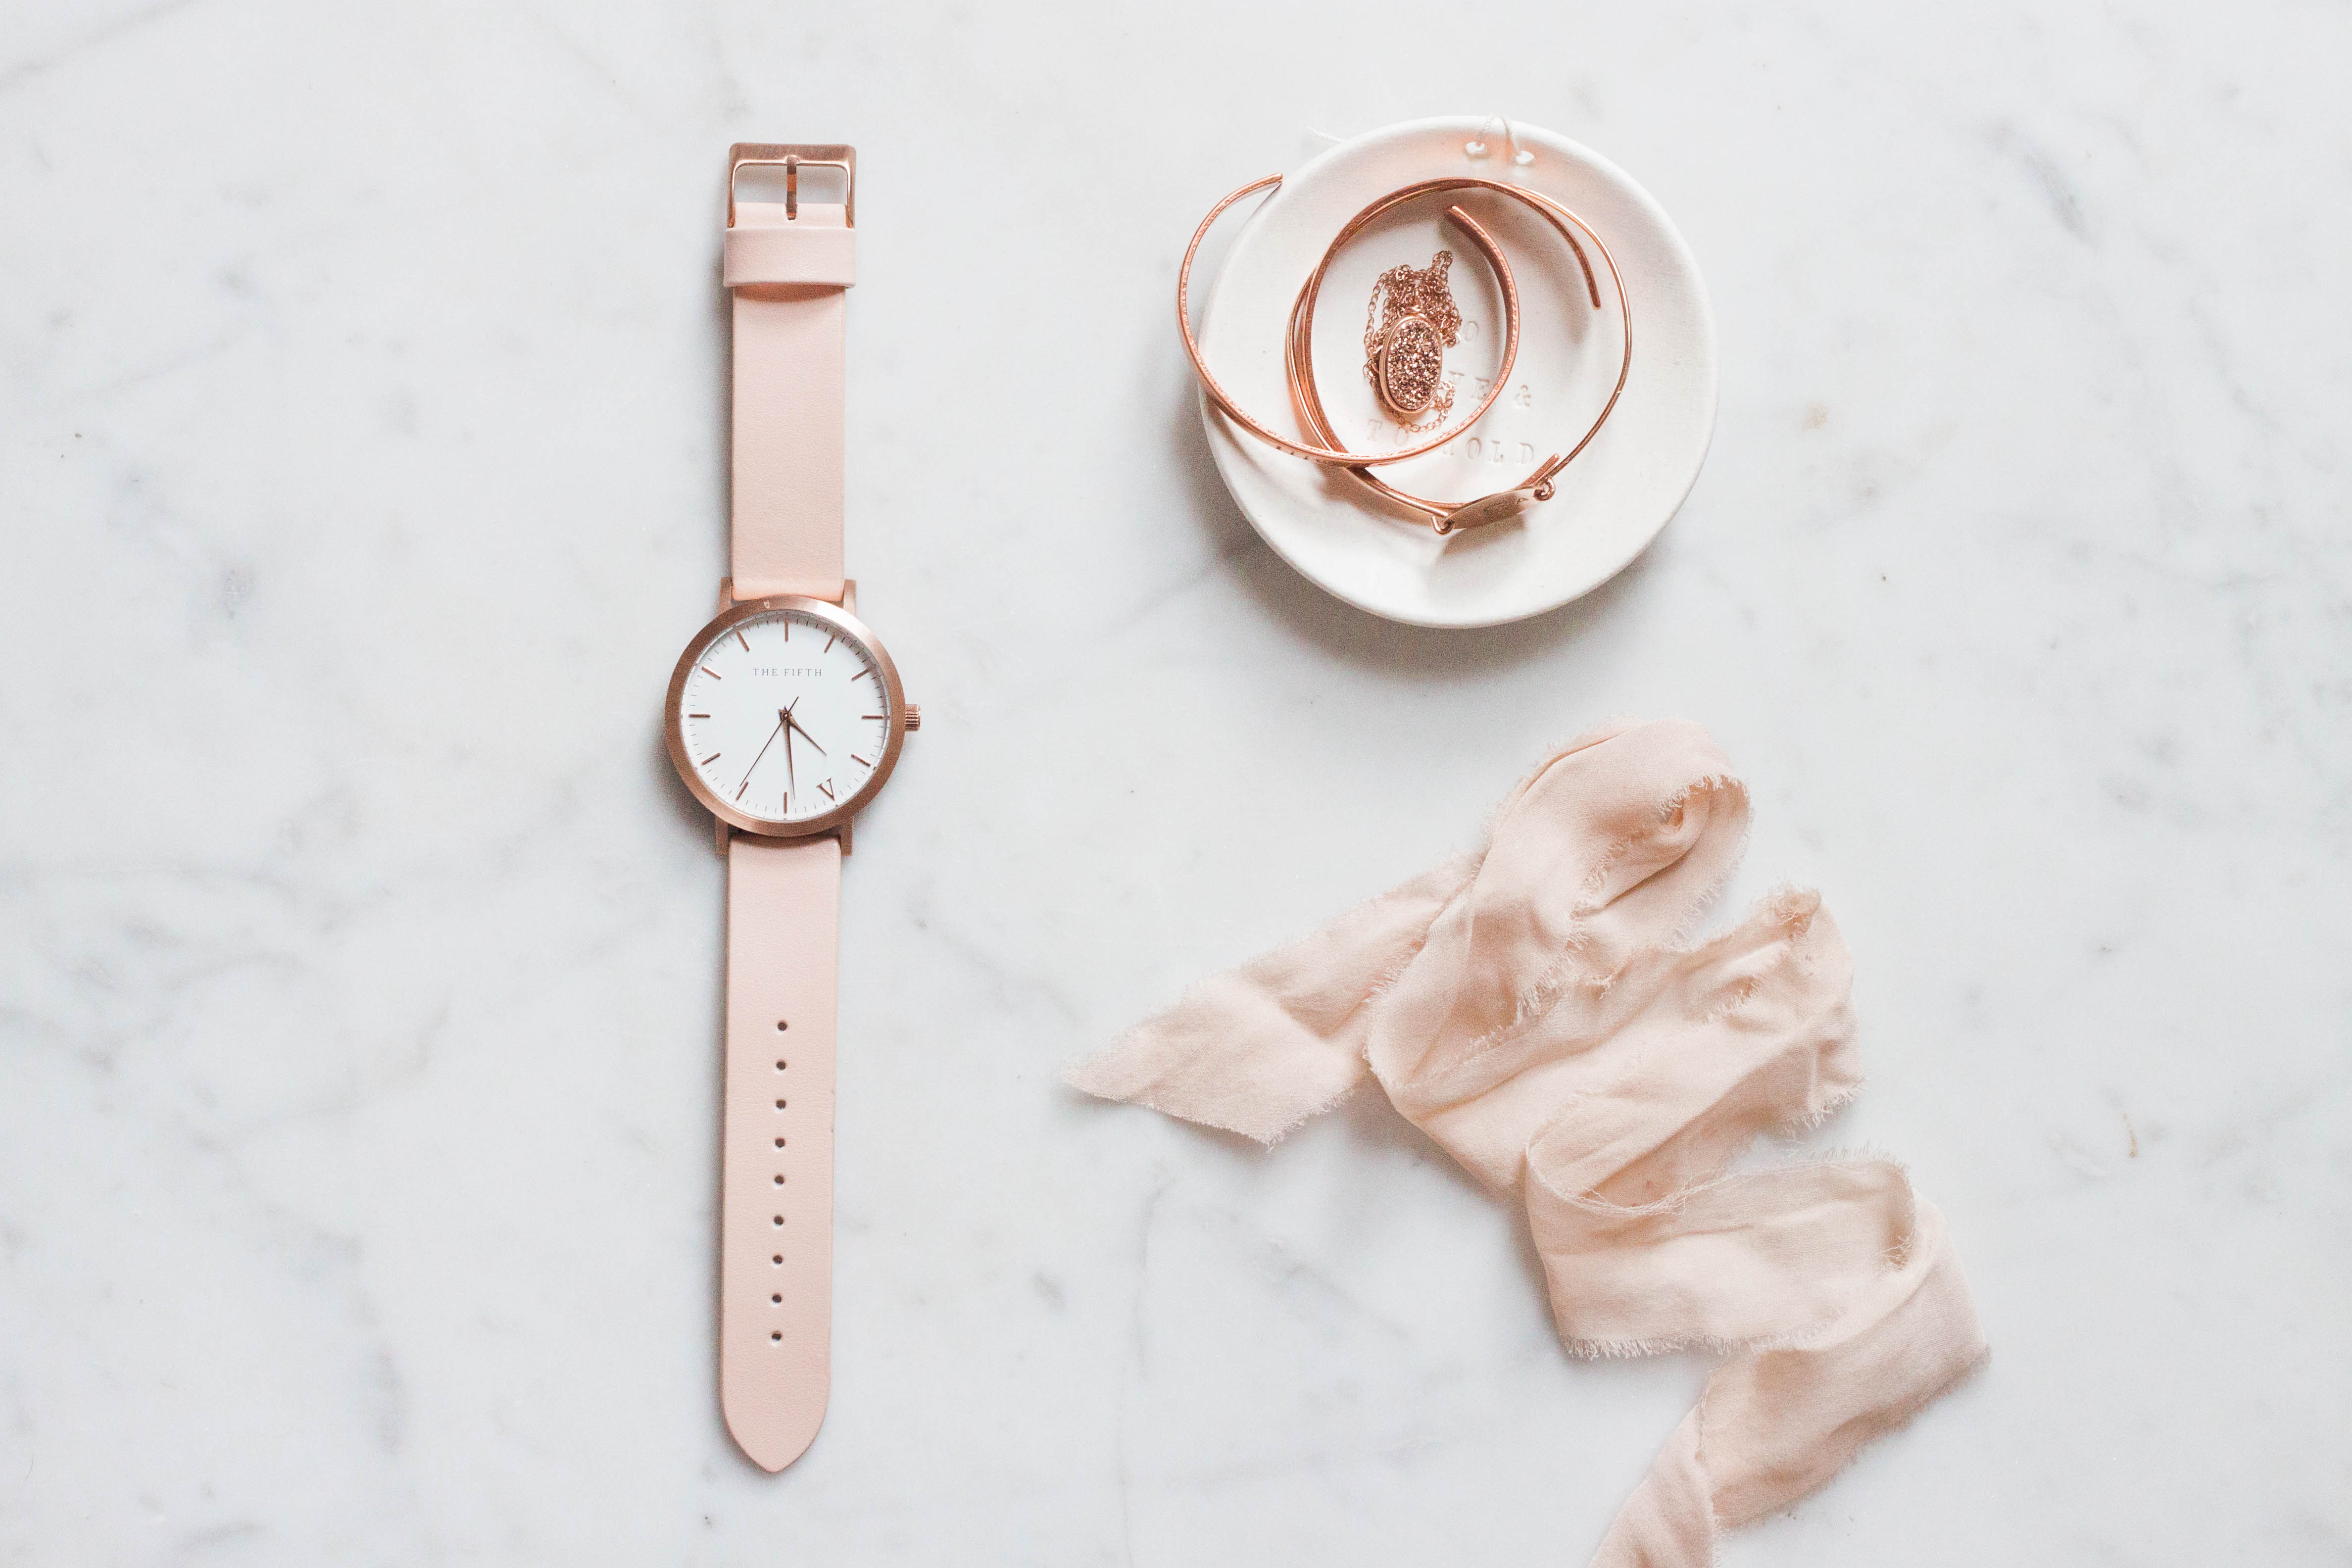 b is for bonnie loves The Fifth Watches | blush + rose gold watch via The Fifth Watches as seen on b is for bonnie design